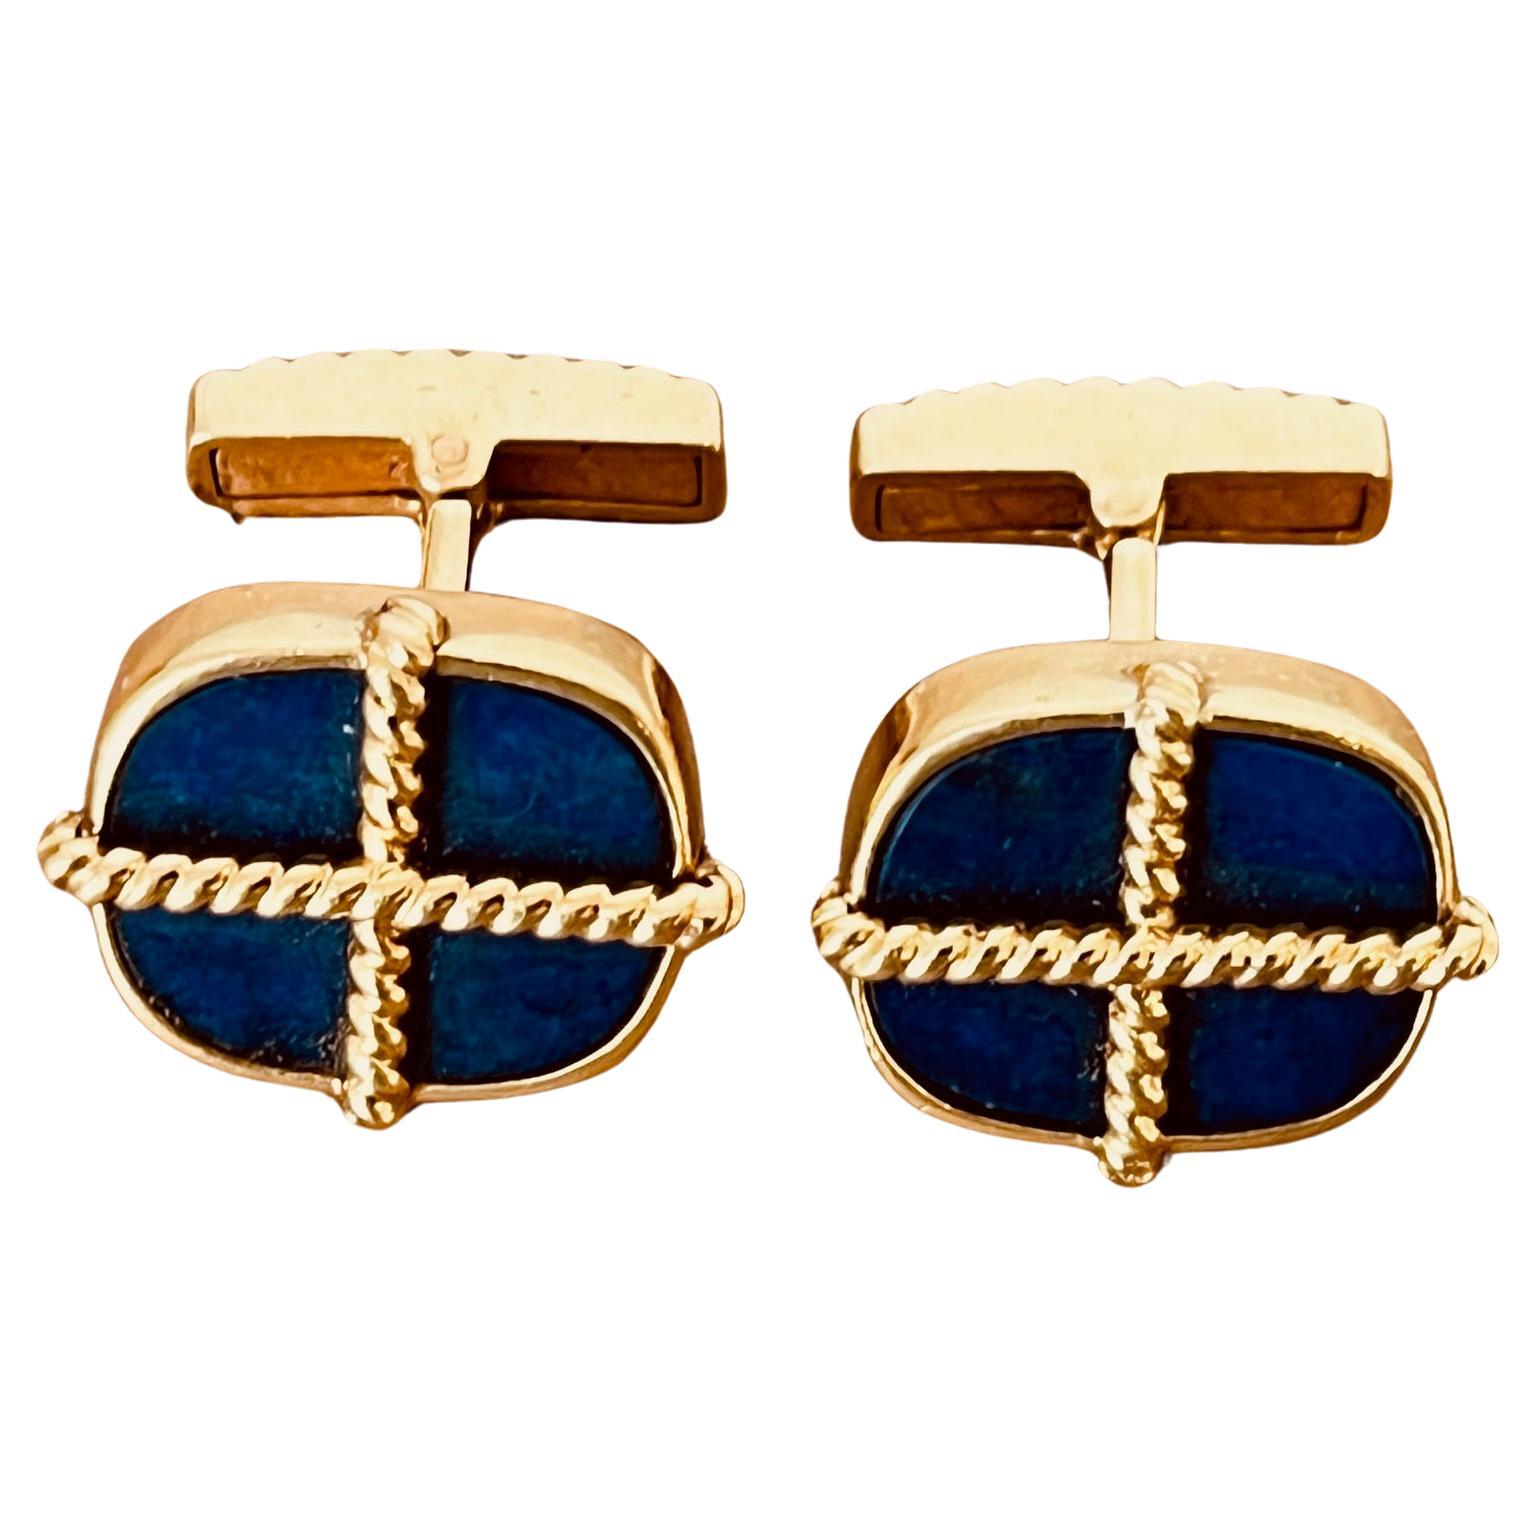 A Pair of 18ct Yellow Gold and Lapis Lazuli Cufflinks. Circa 1970's. For Sale